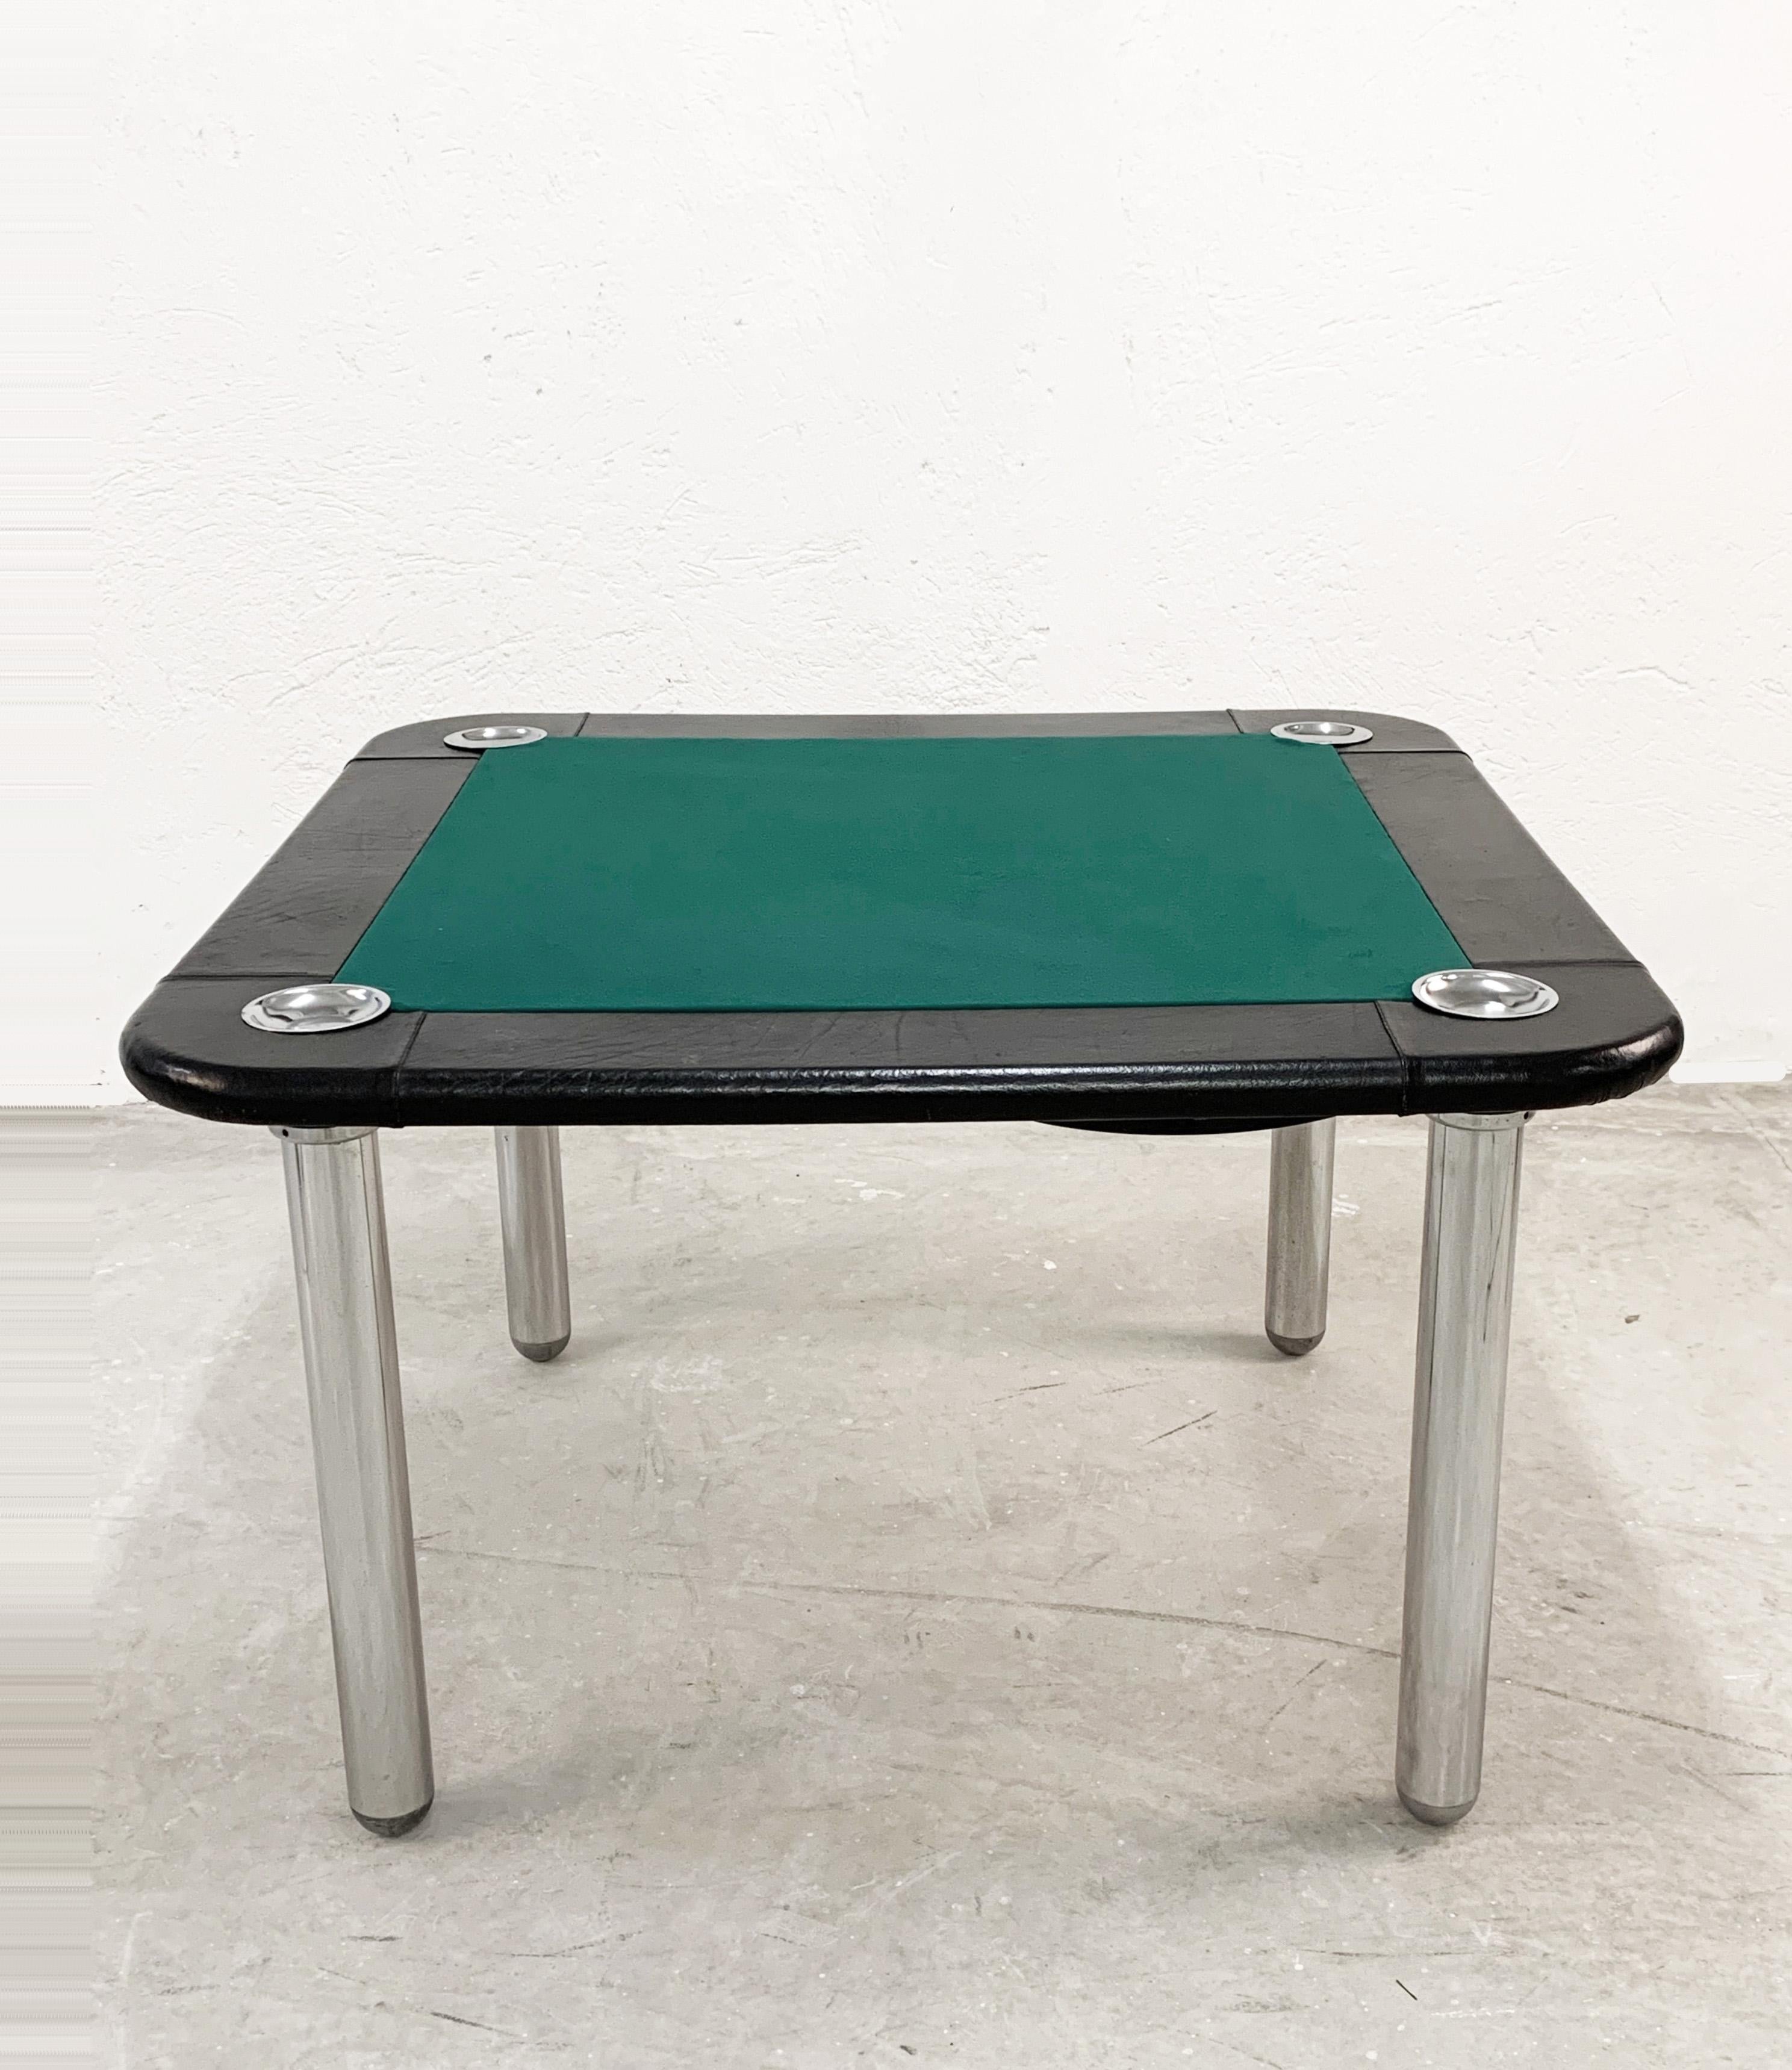 Leather and Chromed Steel Italian Game Table attributed to Zanotta, 1960s For Sale 2